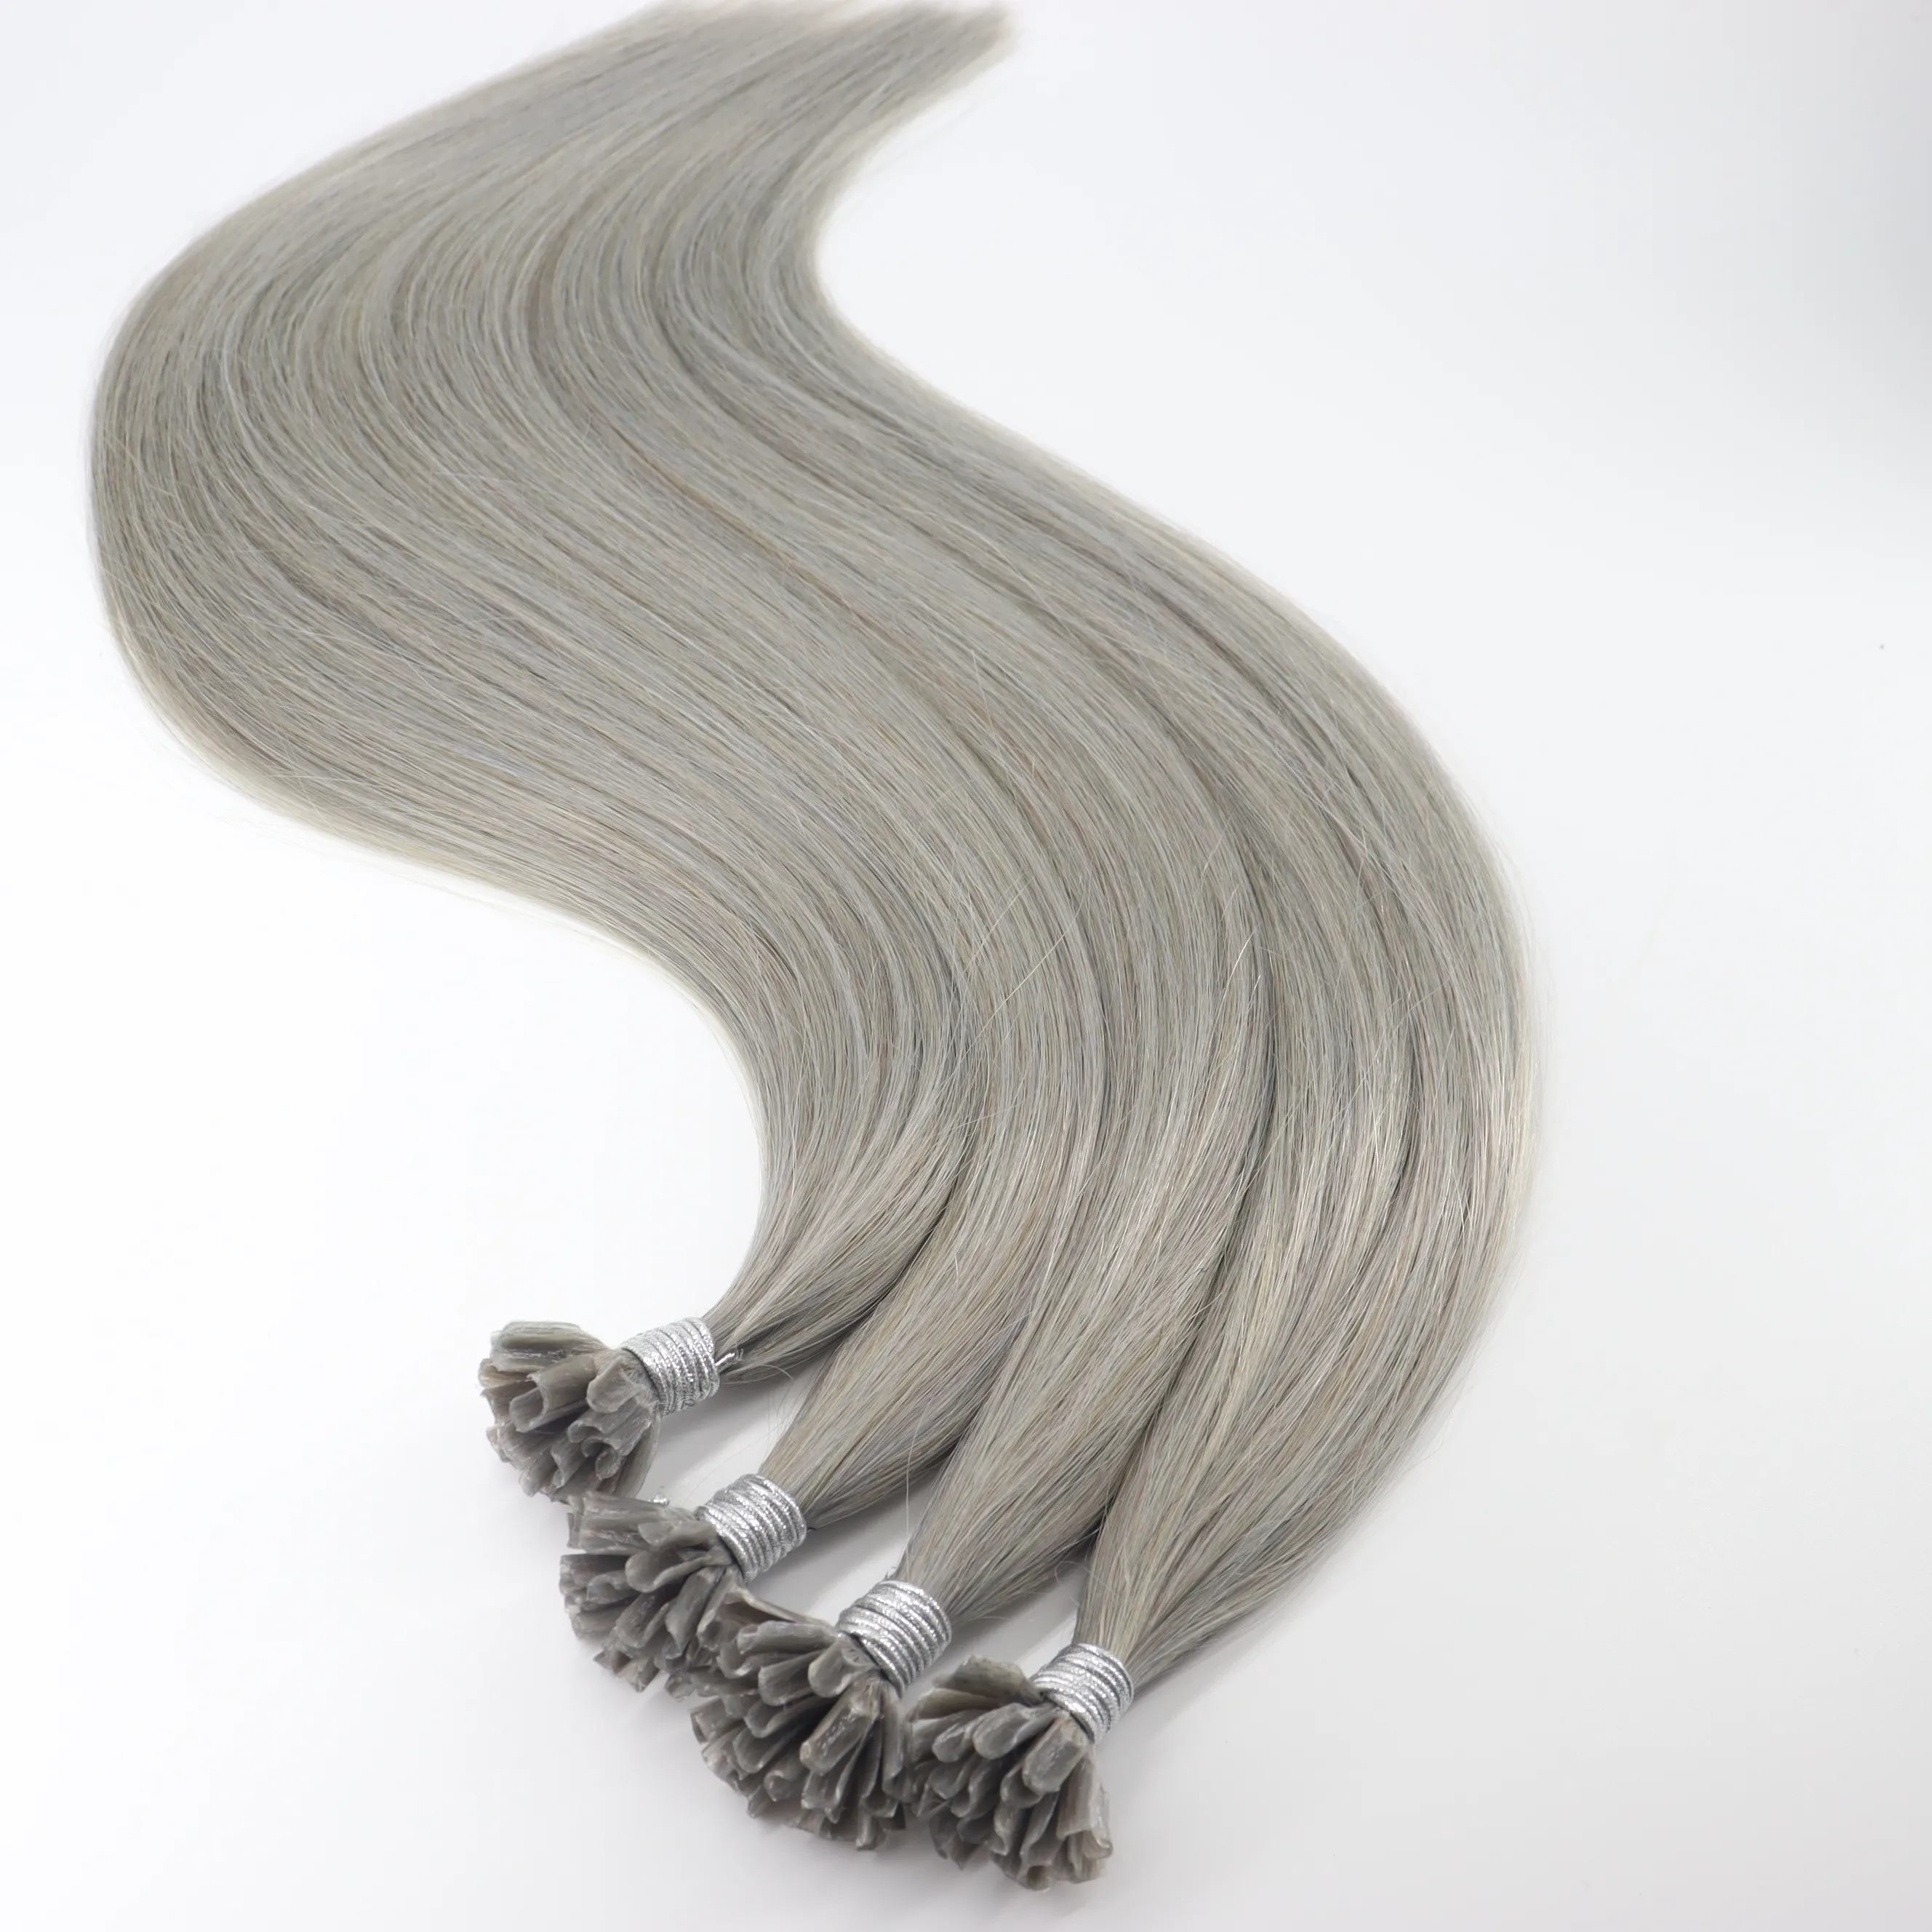 Hot Selling 12a Russian Human Hair Double Drawn Remy Prebonded Keratin U Tip Hair Extension